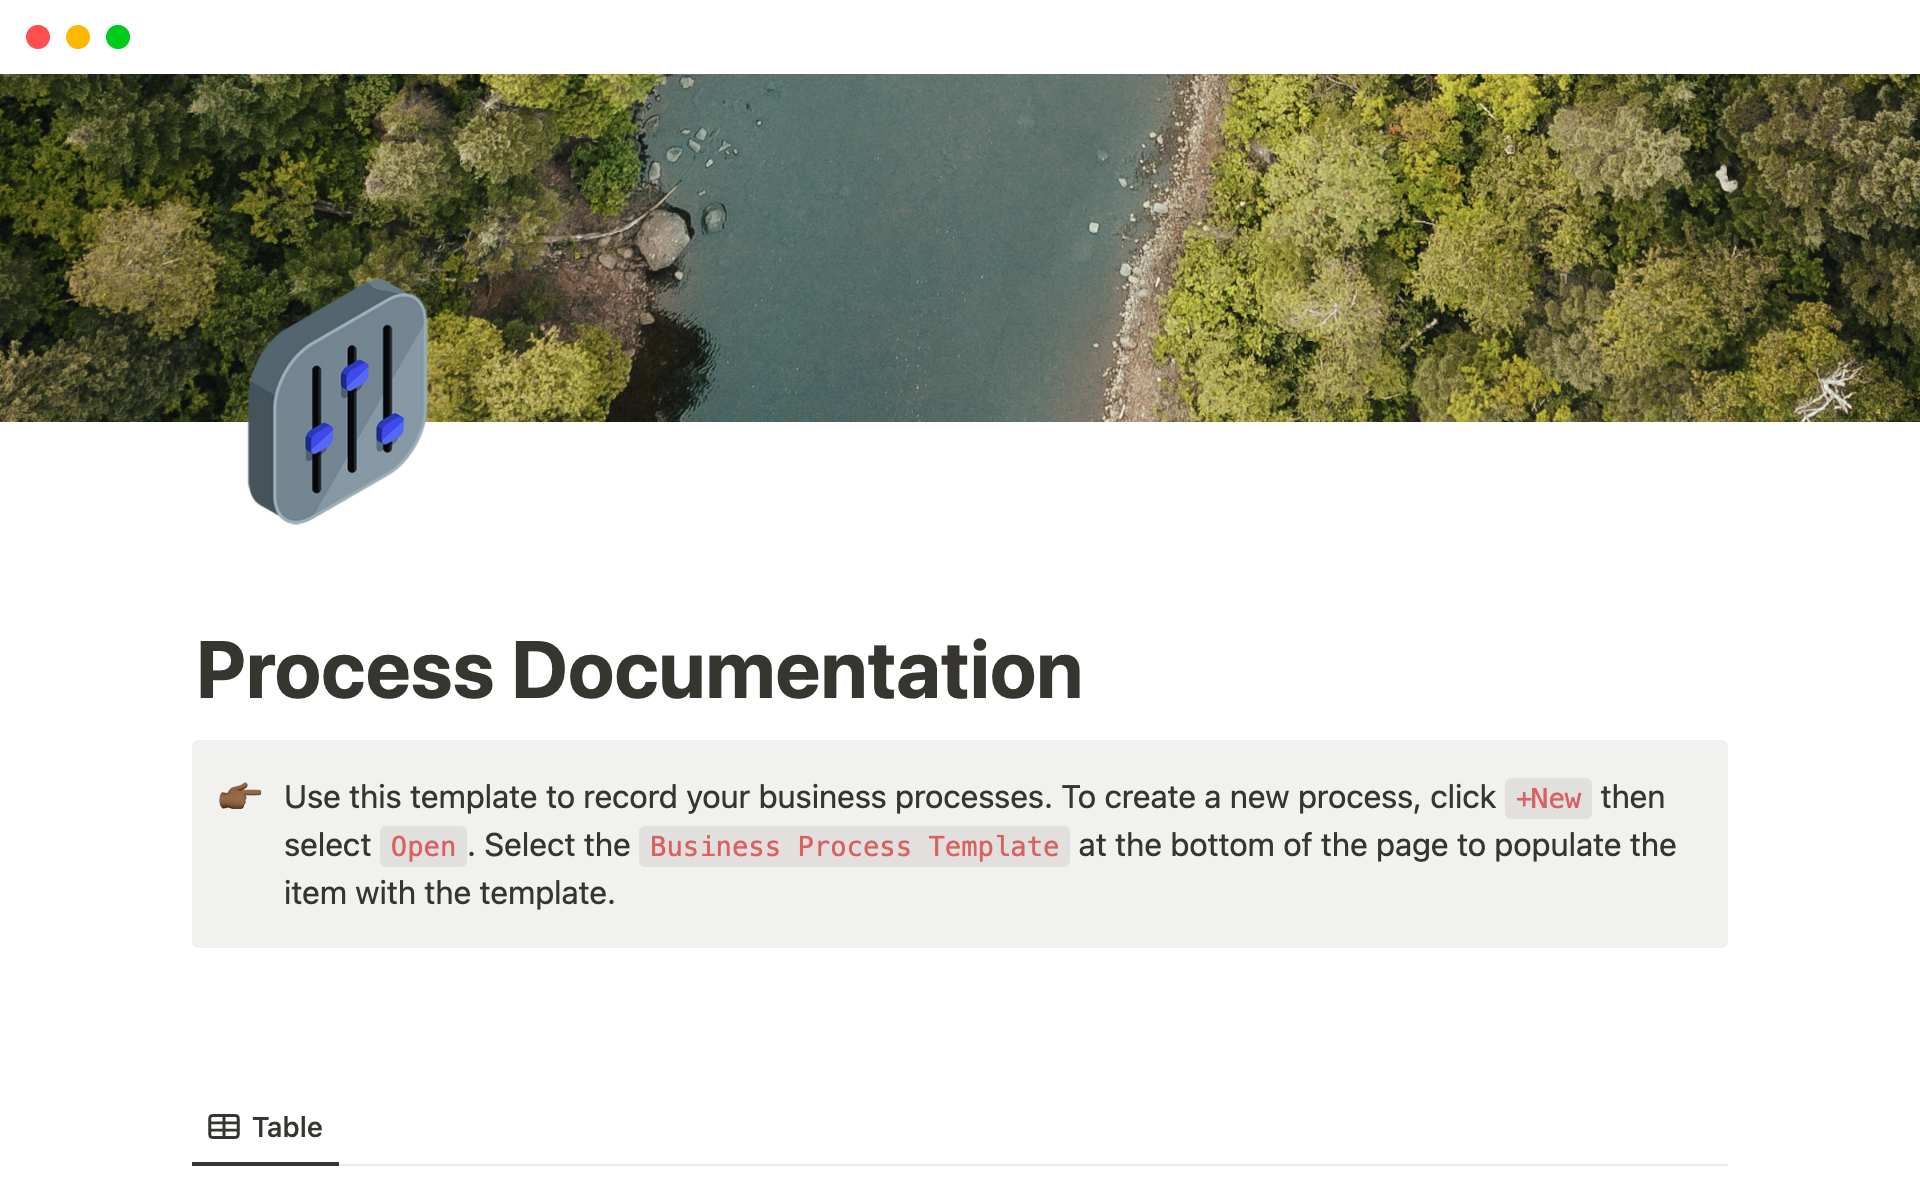 Process documentation is a collection of documents that provide information about how specific processes work within a business. Create a formal business process document using this outline.